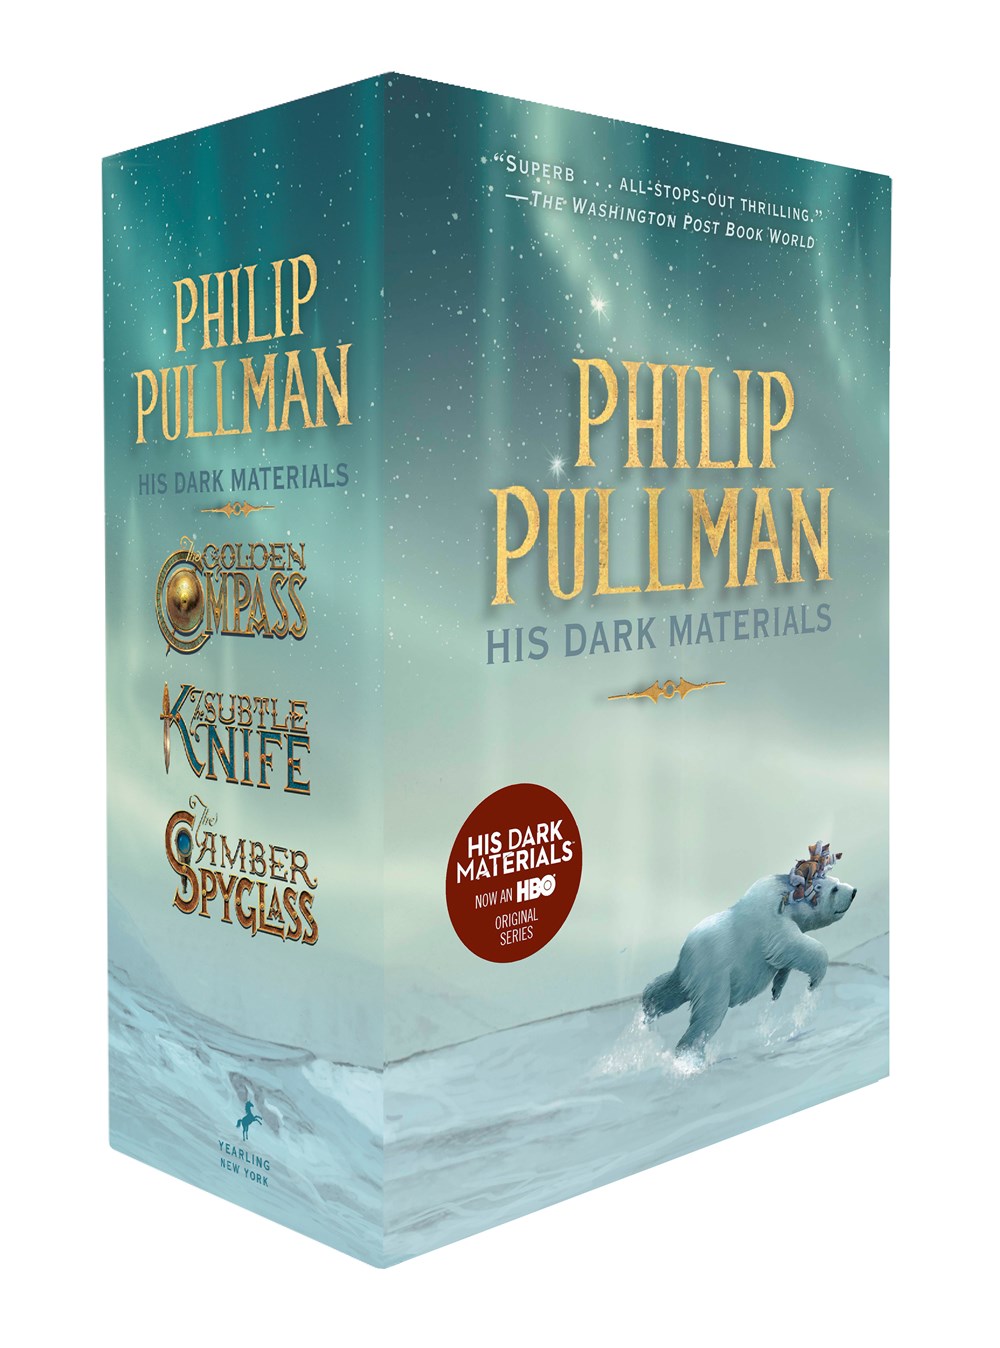 Load image into Gallery viewer, The outer slipcase of the His Dark Materials boxed set, featuring the series and book titles, author name (Philip Pullman), and a polar bear in a tundra landscape.
